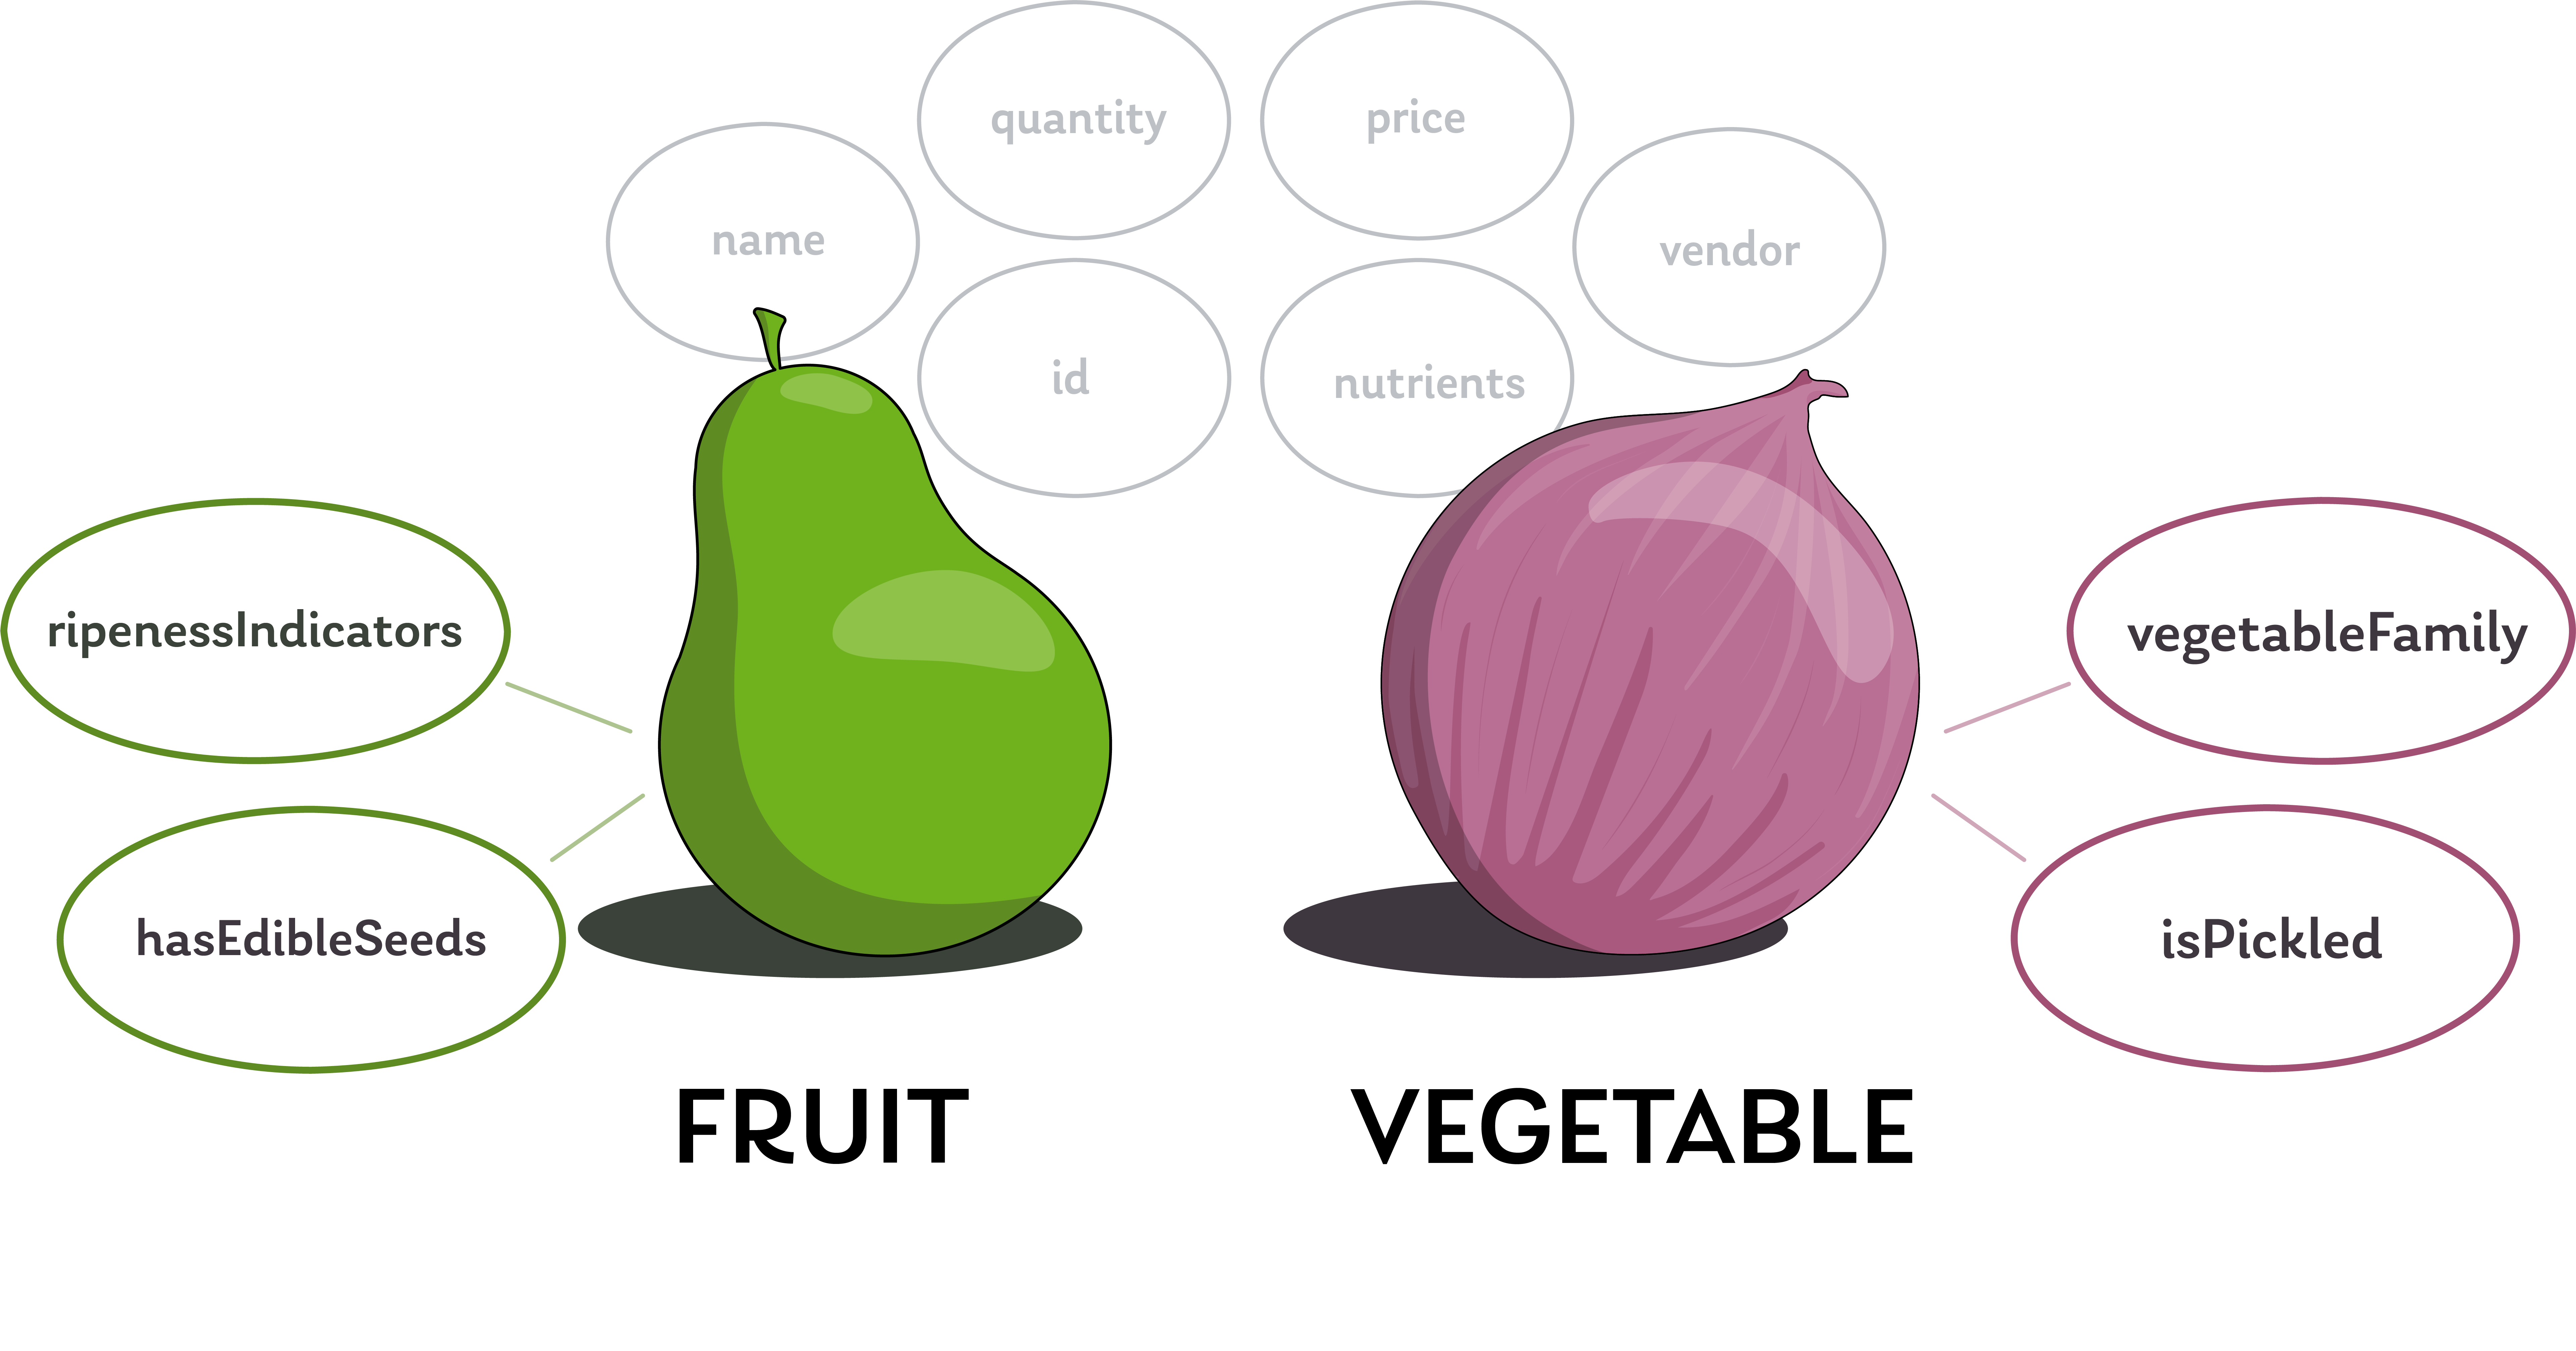 A pear represents the Fruit type, and an onion represents the Vegetable type. They have six fields in common, but each also defines two of its own unique fields that the other does not.